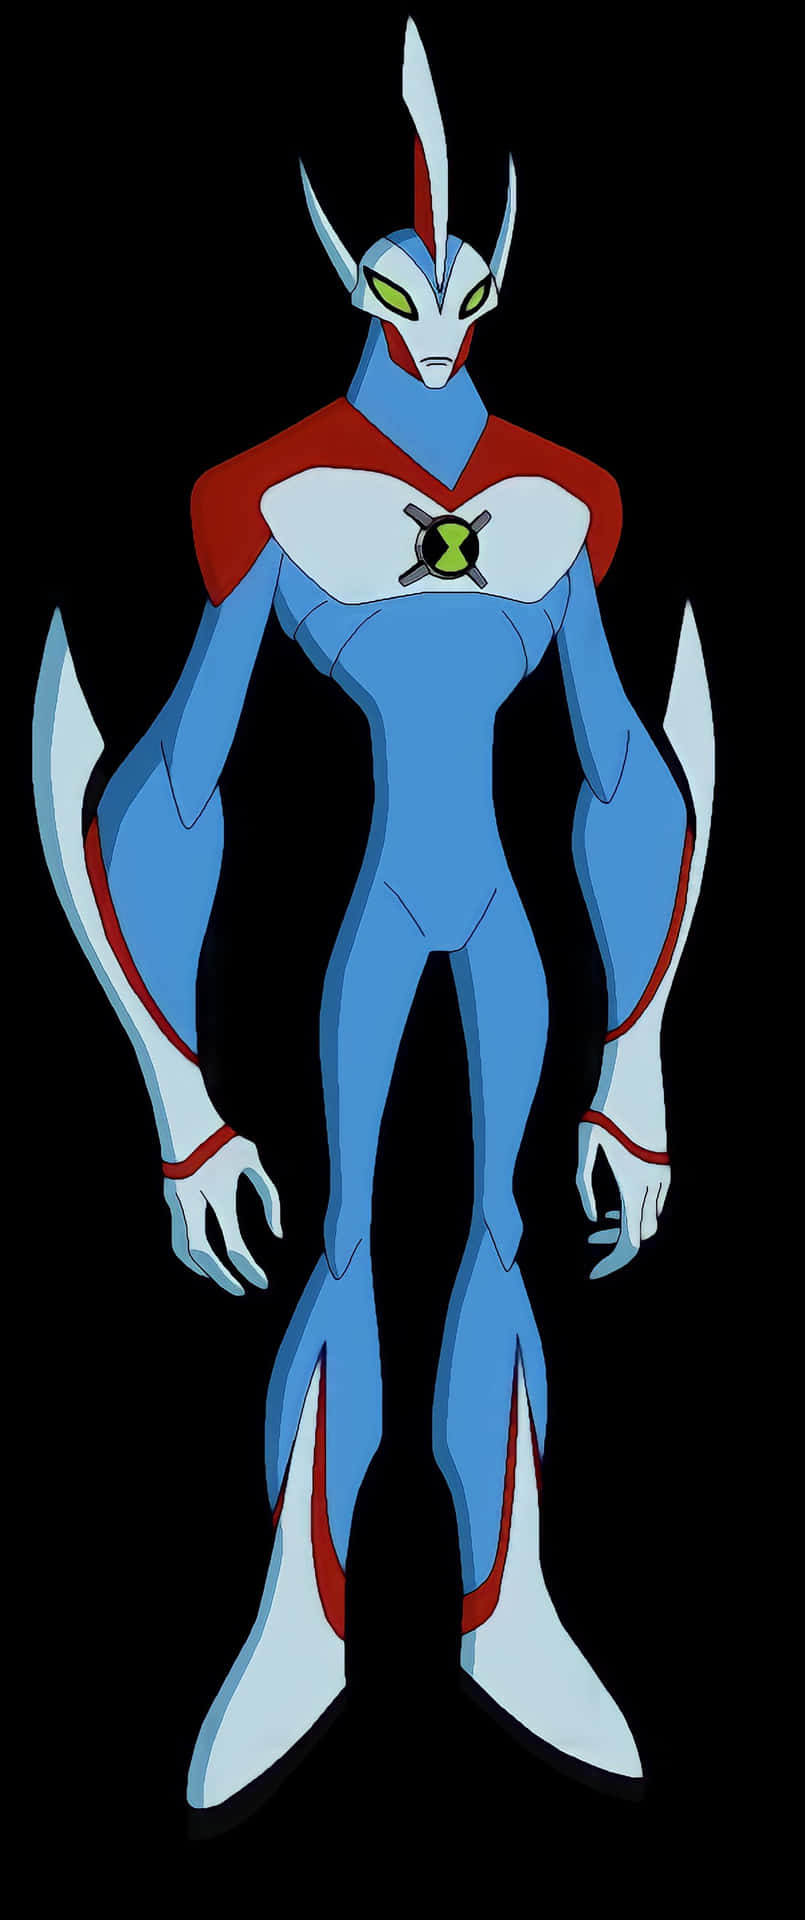 a blue and white cartoon character with a red and white outfit